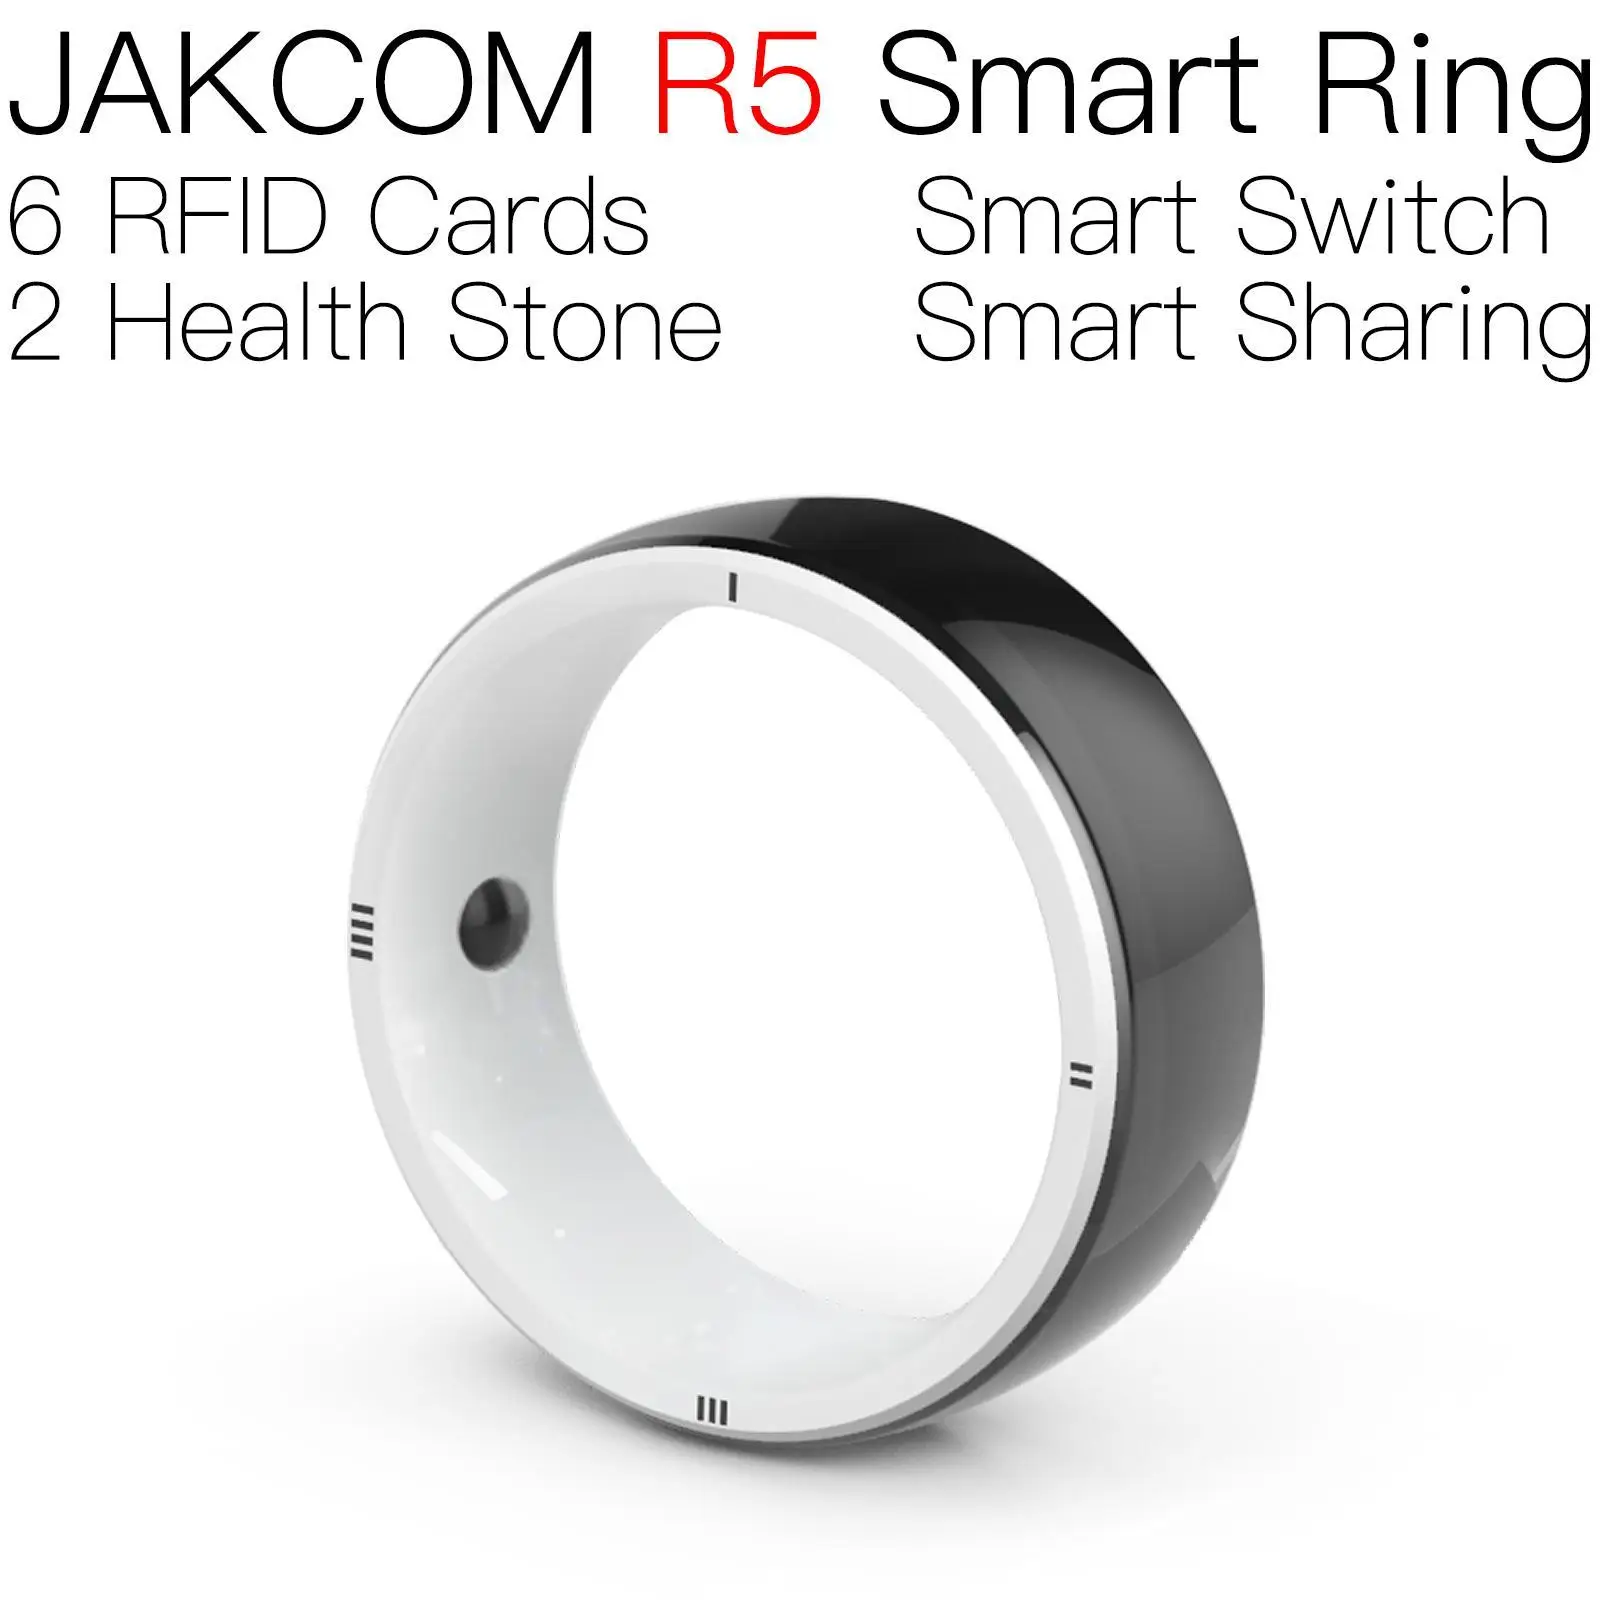 

JAKCOM R5 Smart Ring better than north edge watch band 5 couple xaomi official store i9 flipper zero device k50 gaming